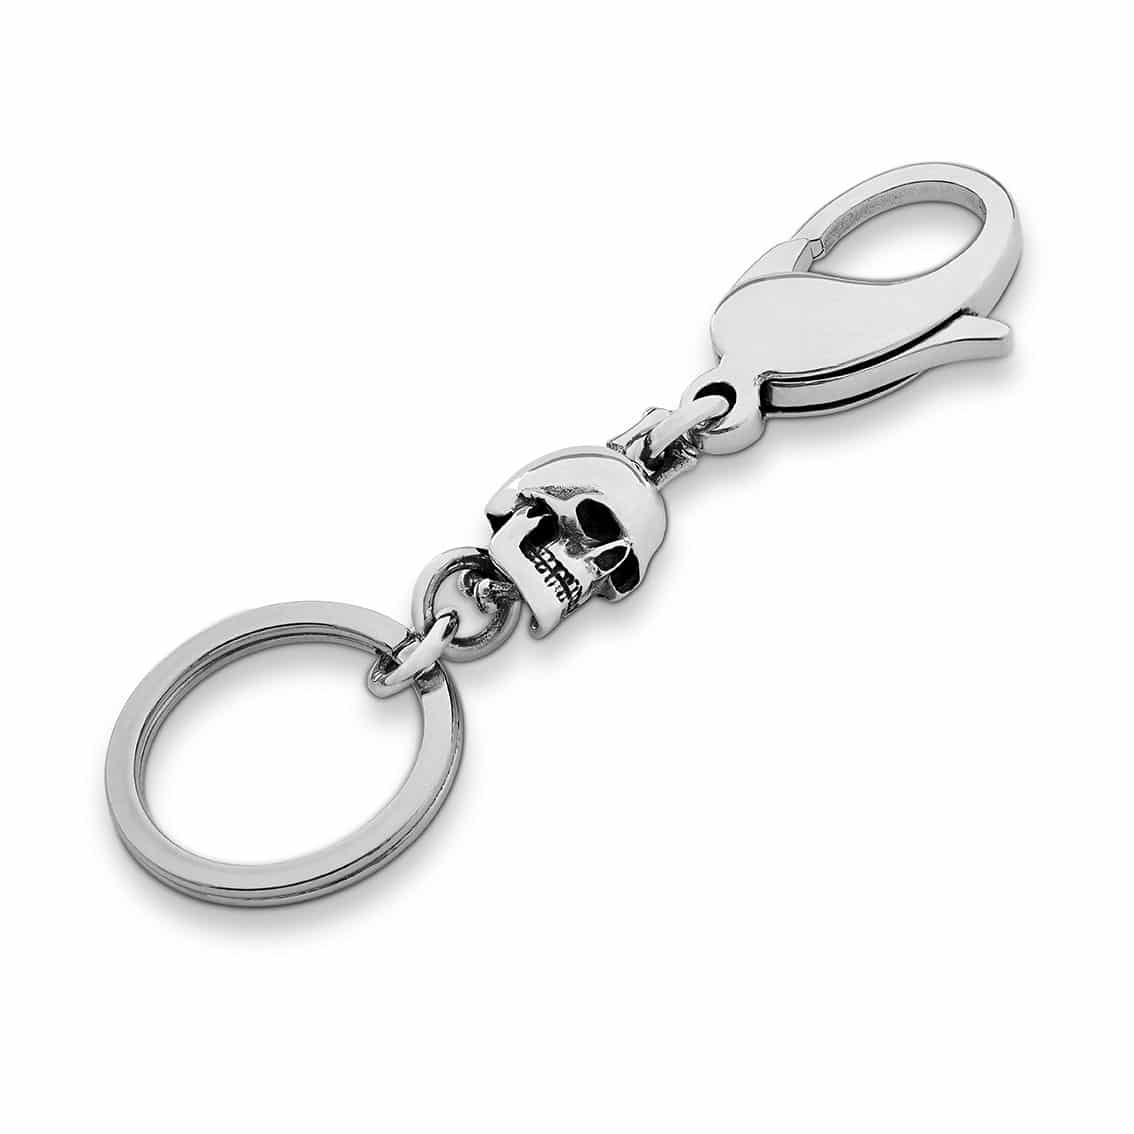 Anatomical Skull Key Ring - The Great Frog